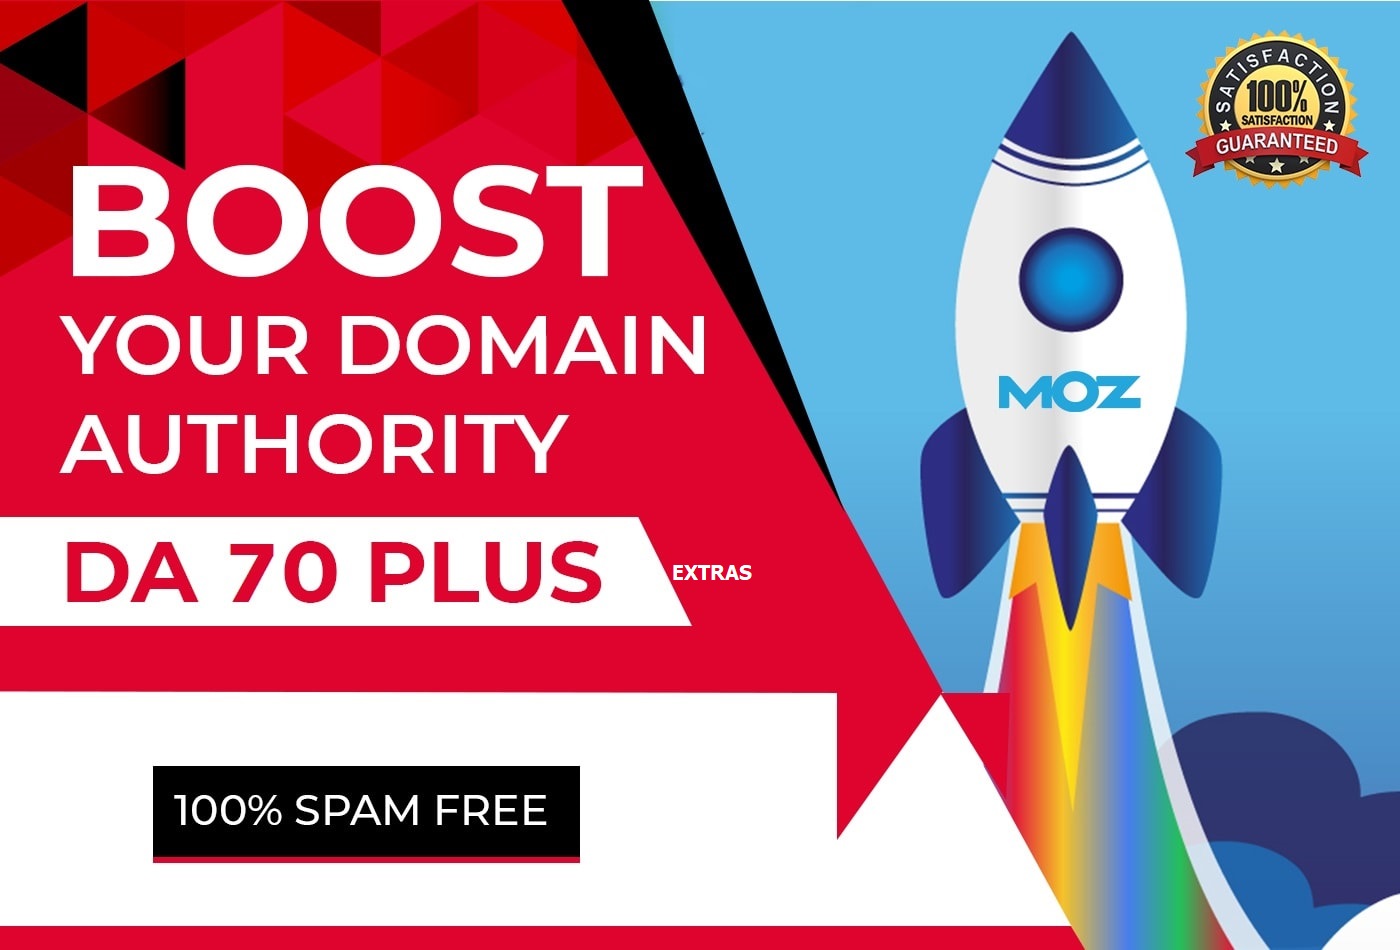 Boost Your Website MOZ Domain Authority DA40 Plus Organically - No Redirect Links